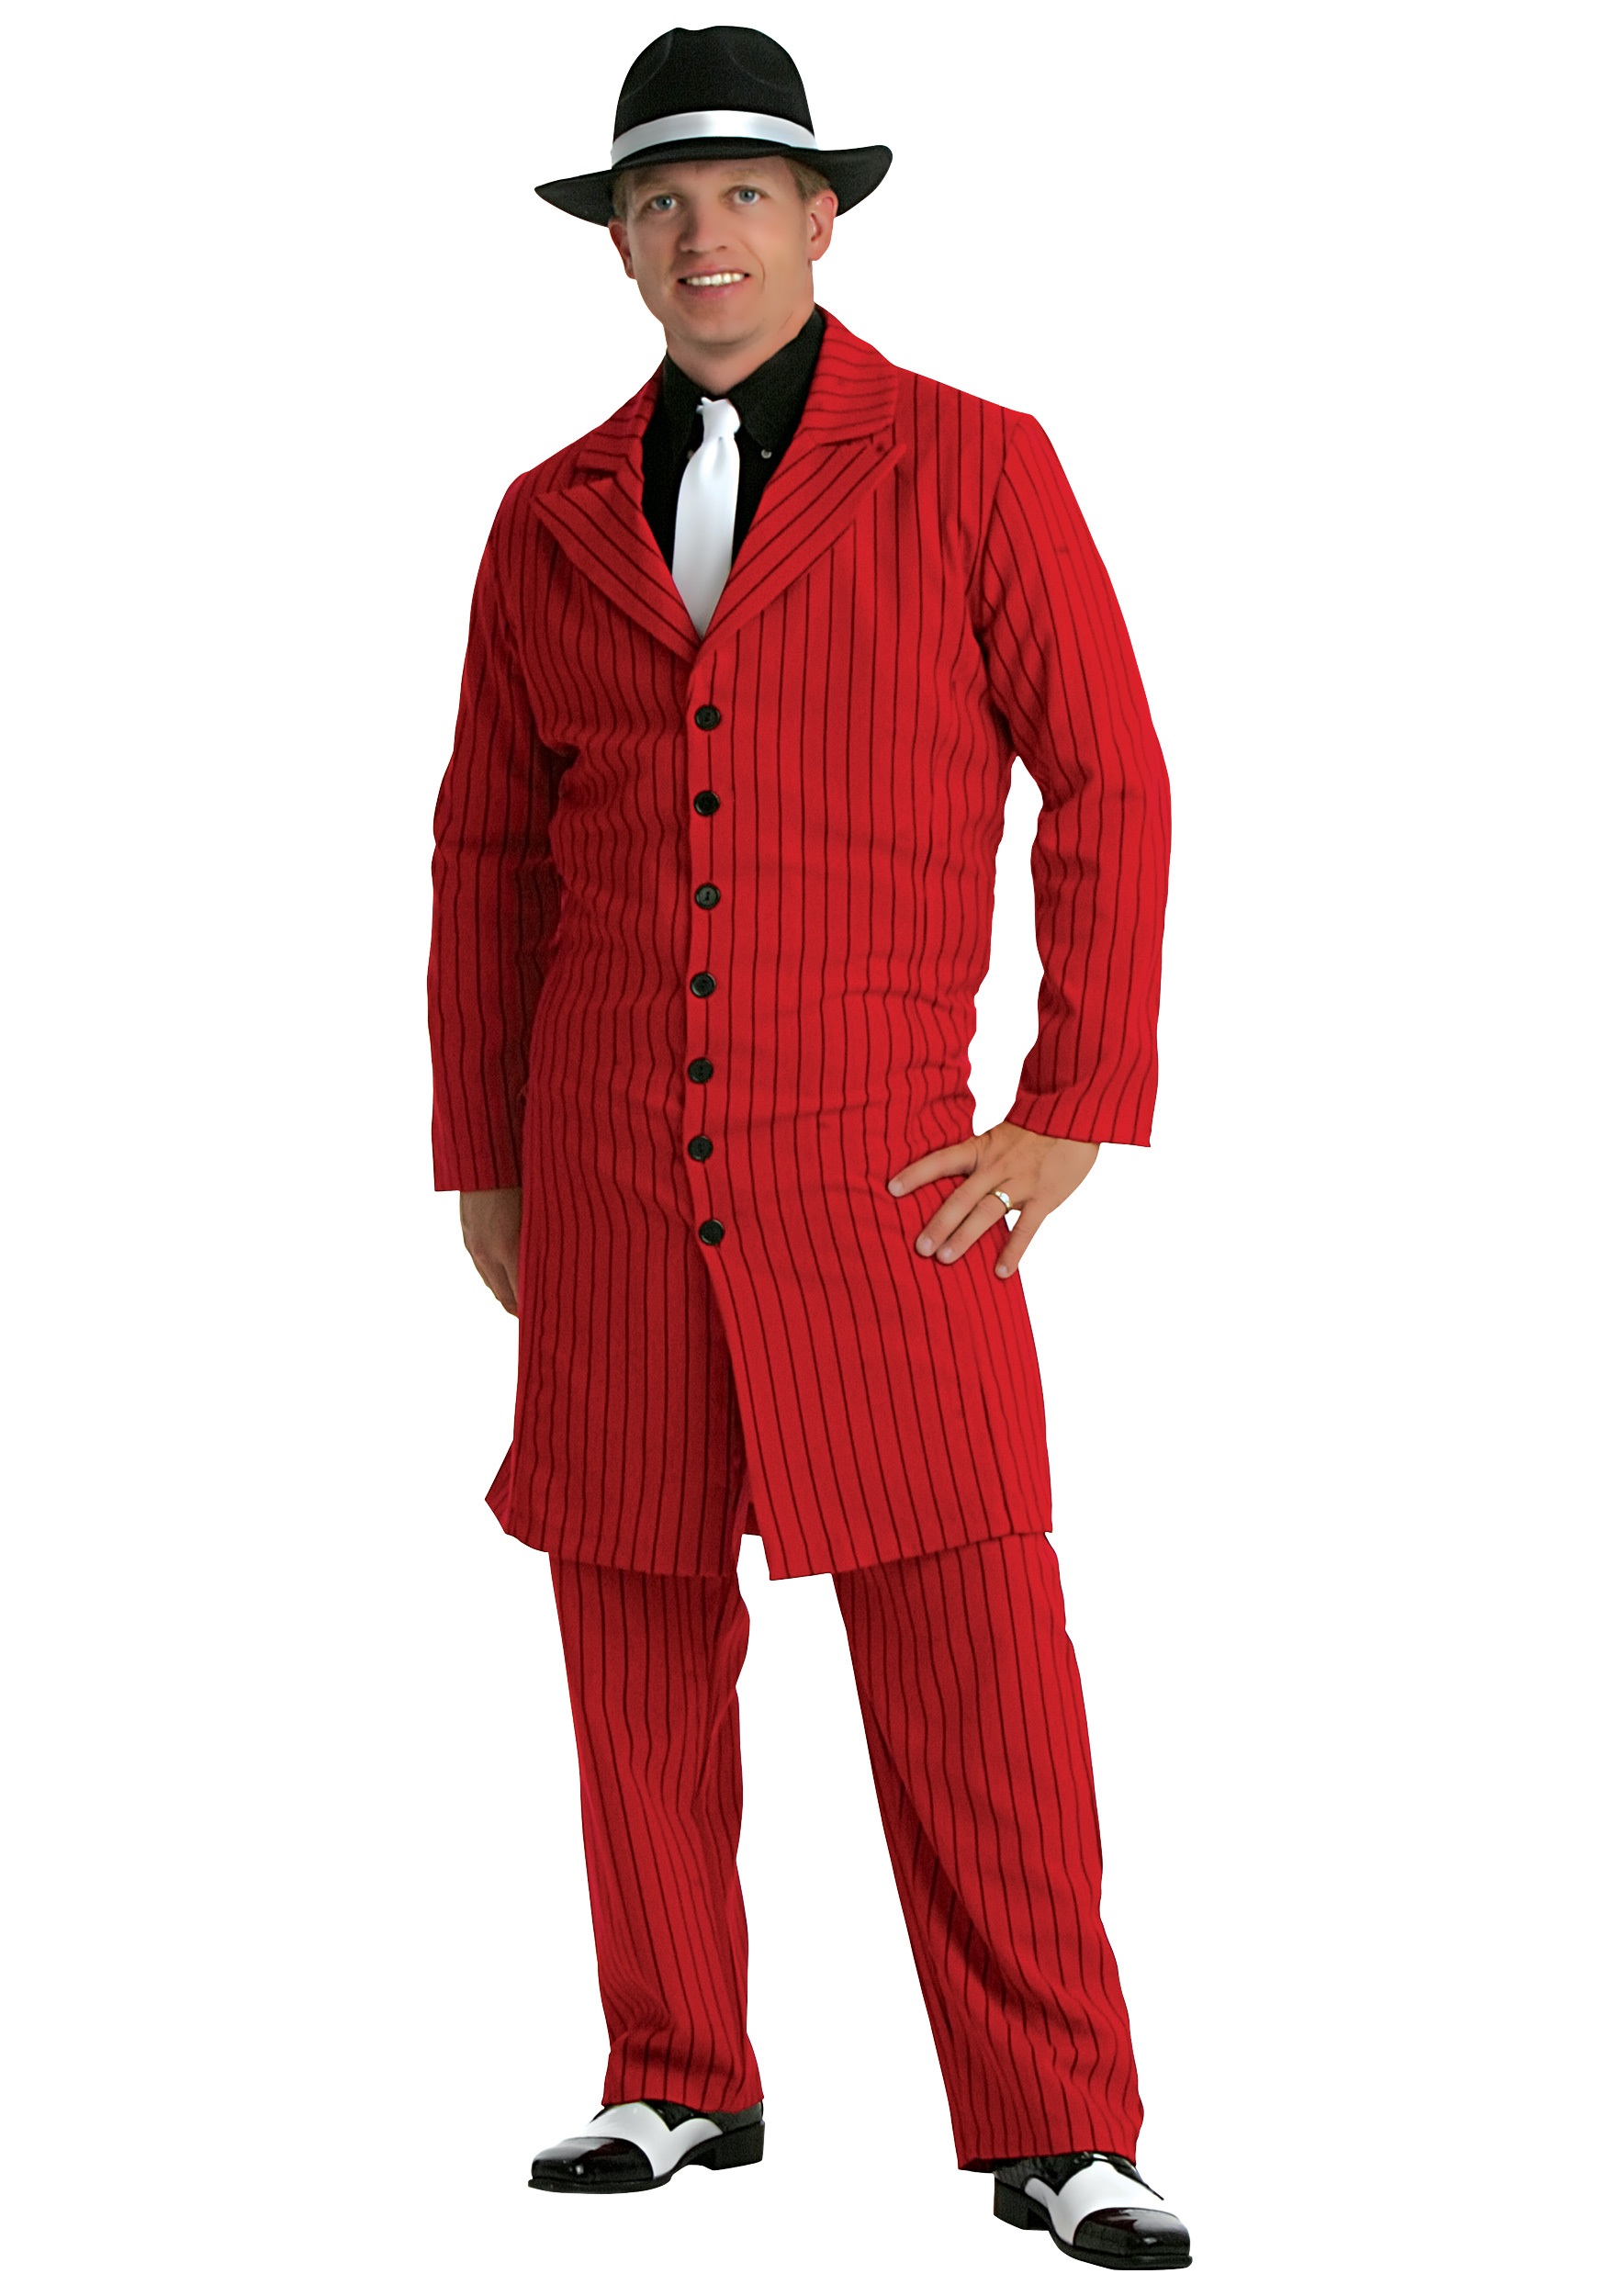 Photos - Fancy Dress FUN Costumes Men's Red Zoot Suit Plus Size Gangster Costume Red FUN2004RDP